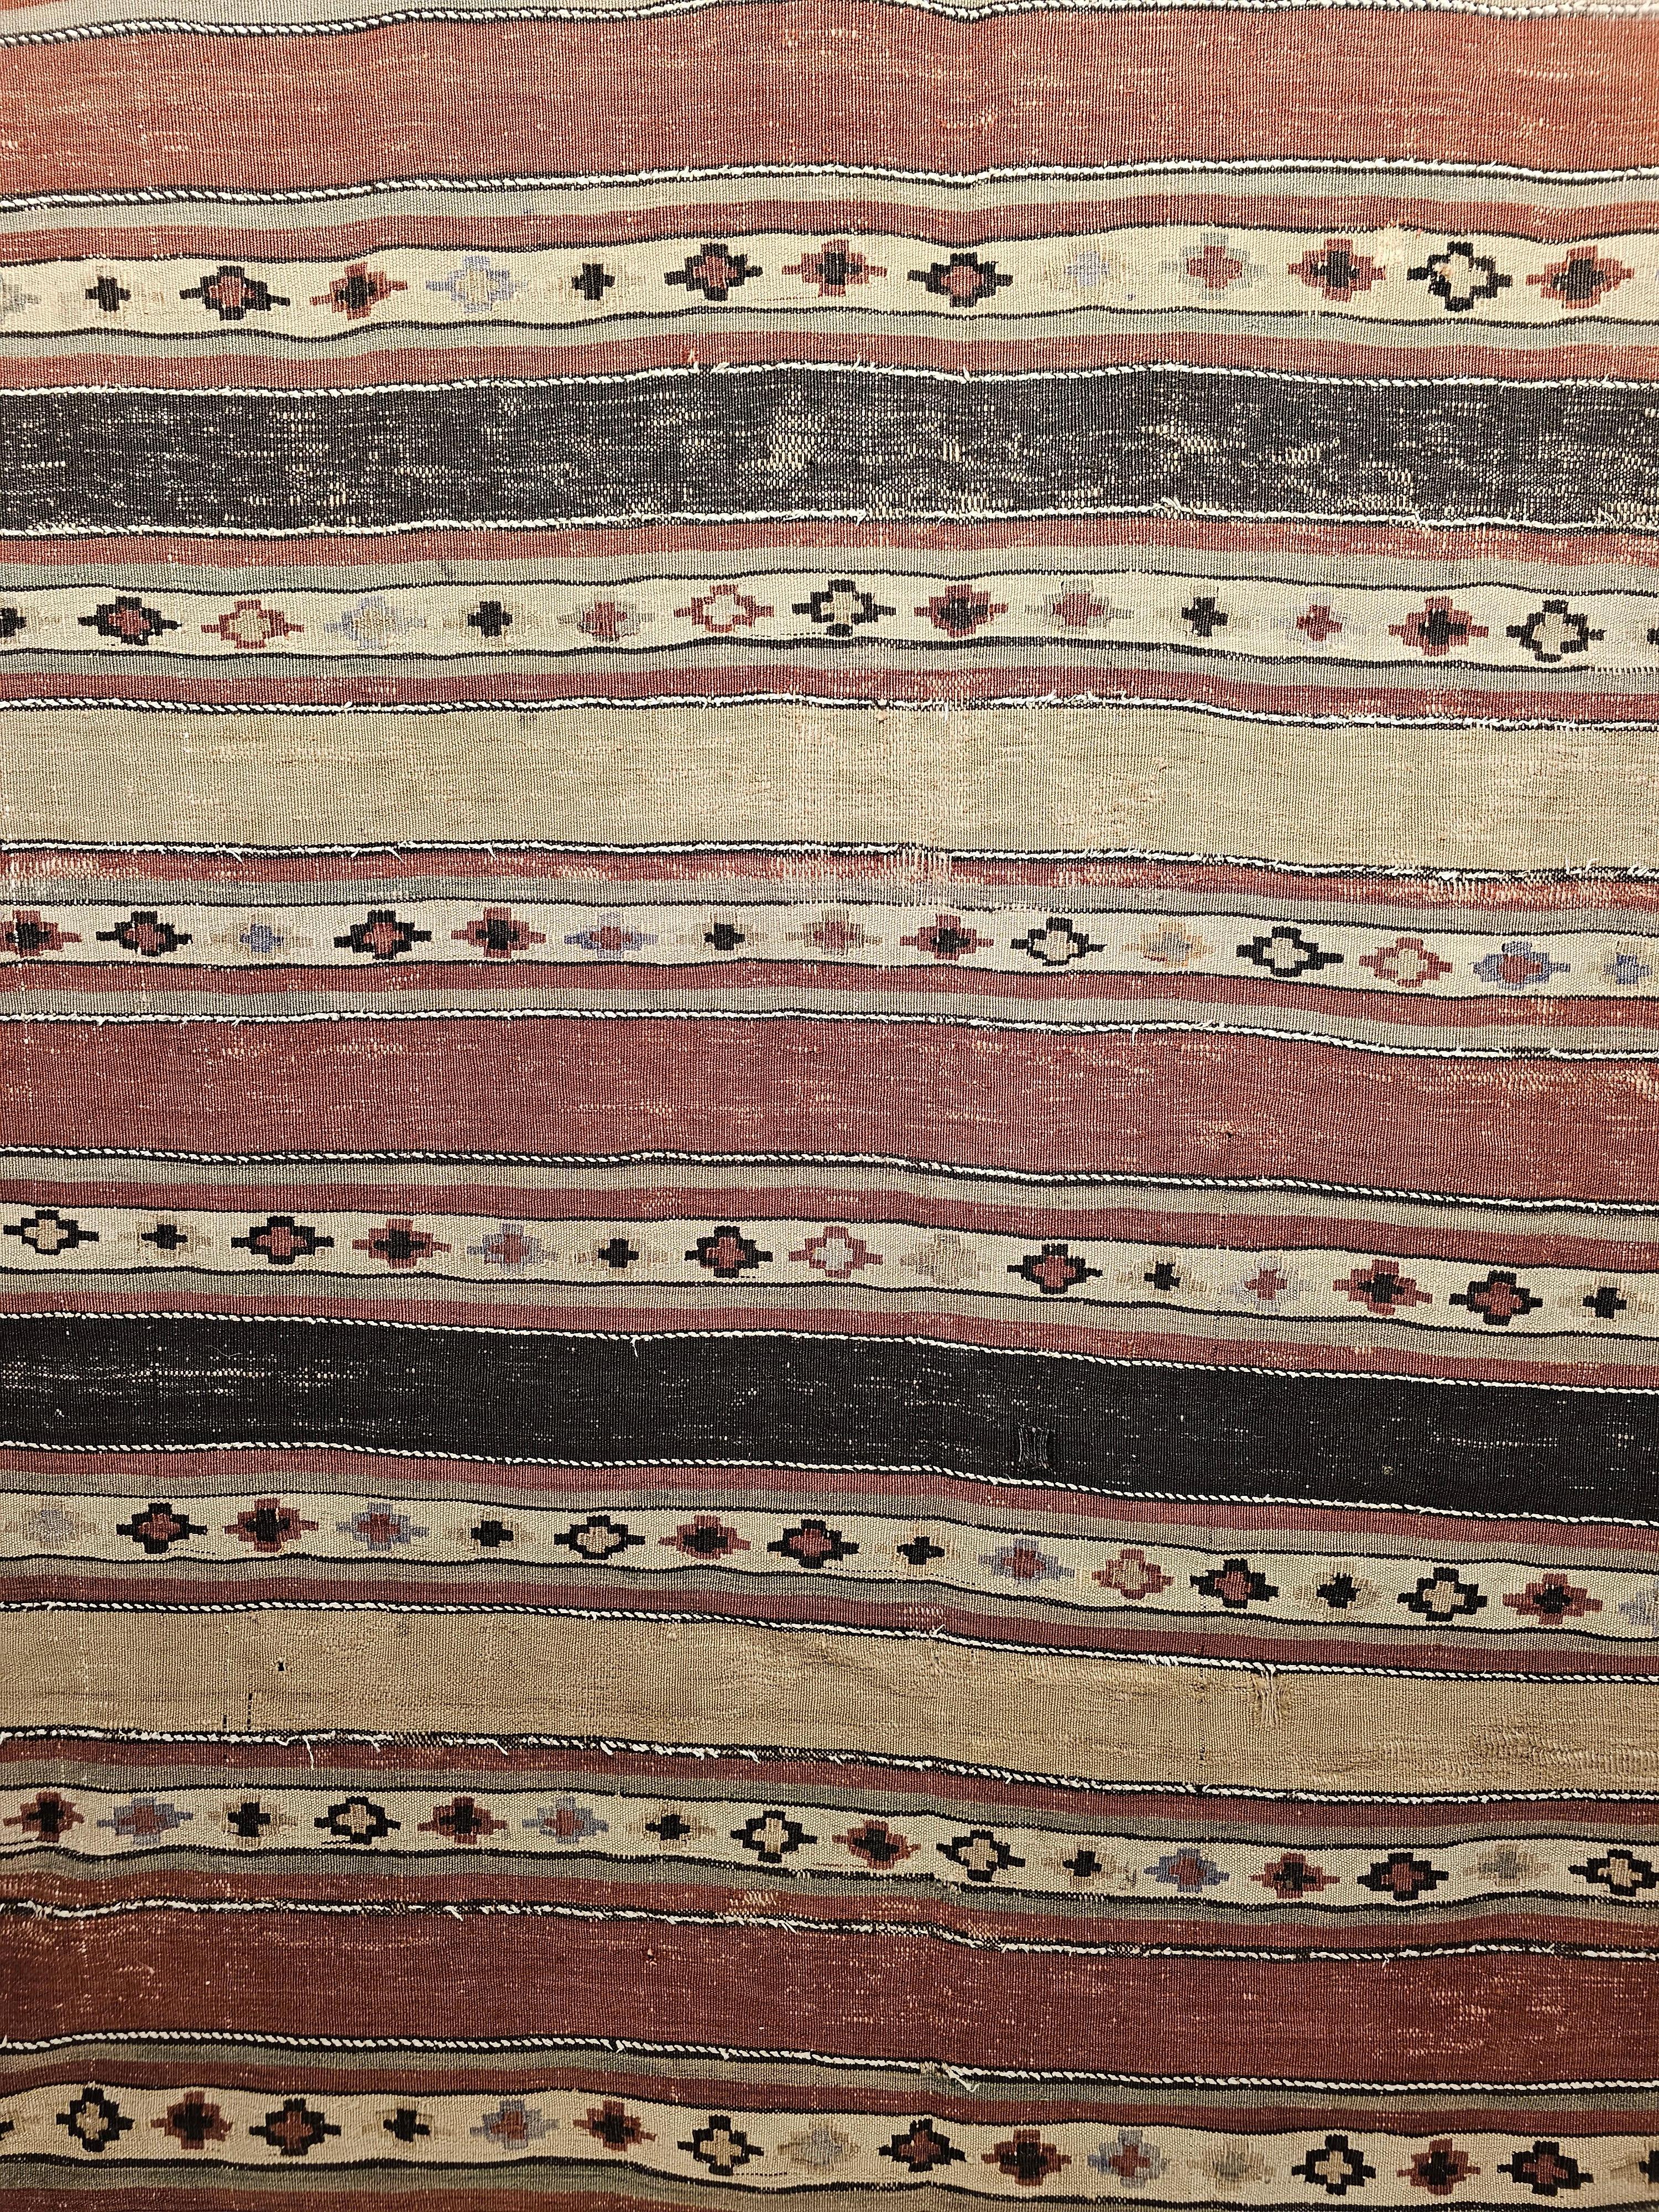 Early 1900s Persian Shahsavan Kilim with Southwestern Earth Tone Colors. The kilim has an alternating stripe design in black, brick red, ivory, and pale green with one stripe being in the solid color and the adjacent ones having small medallion